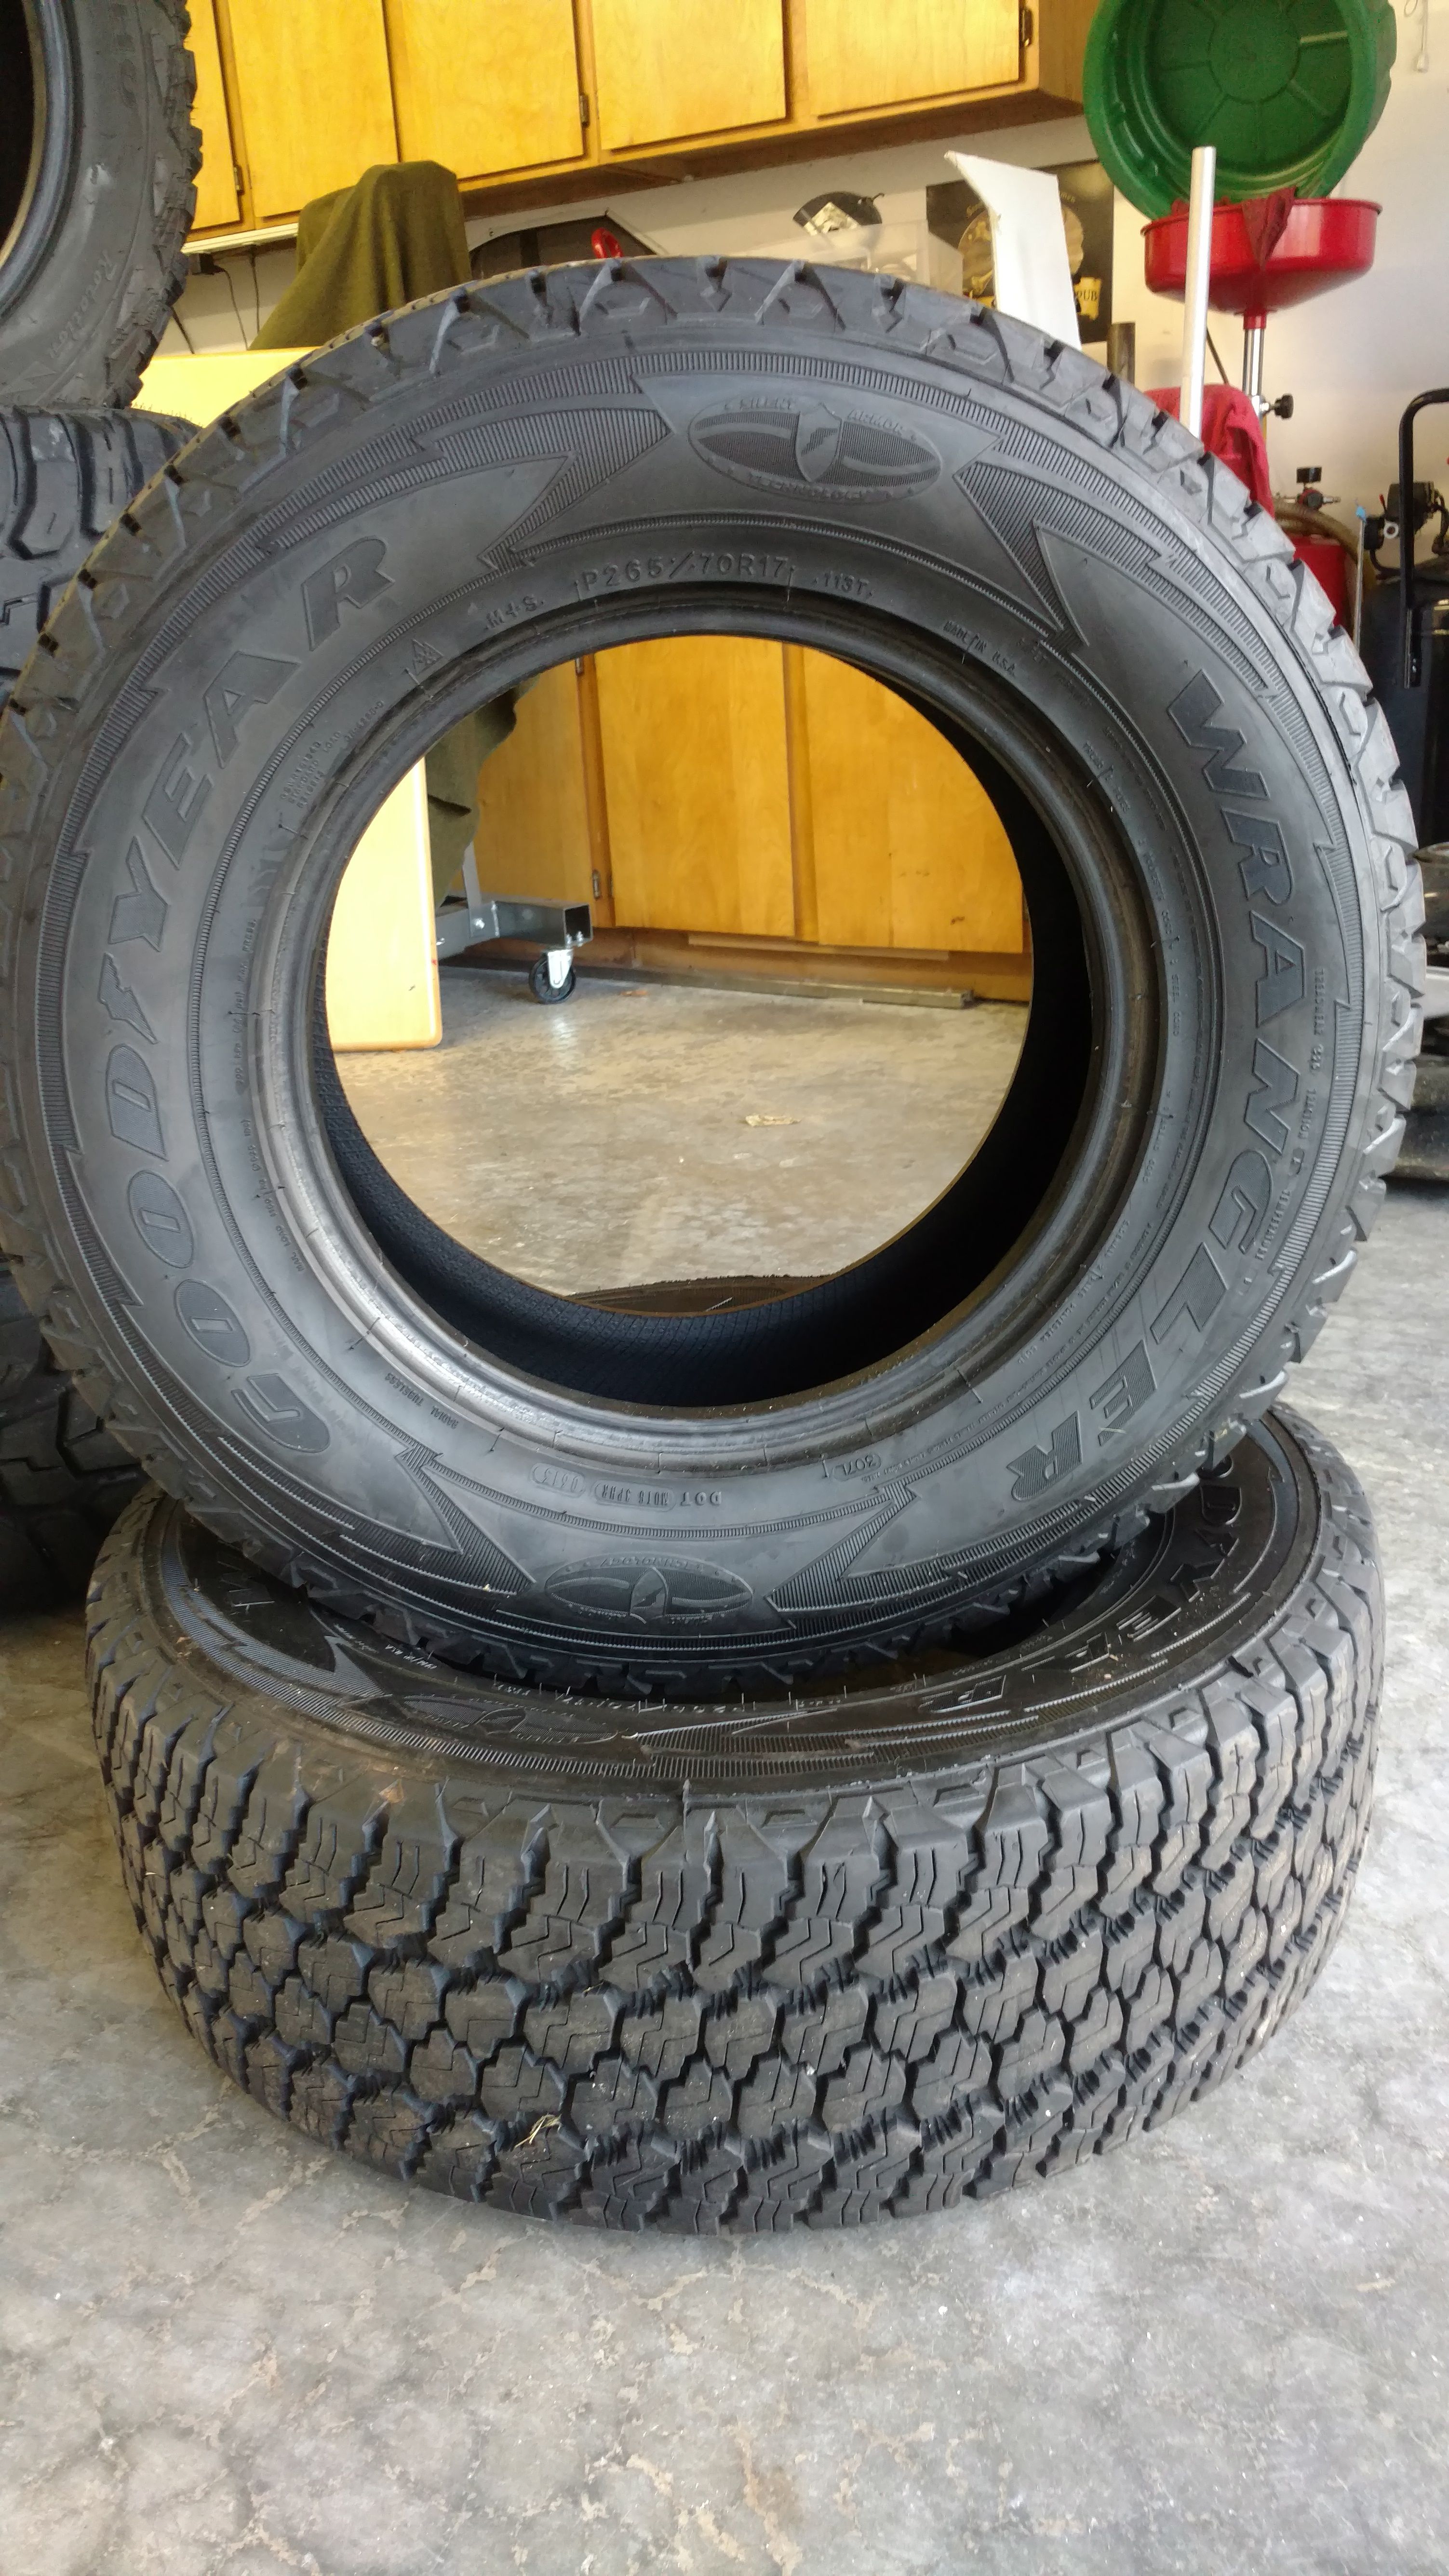 2 Goodyear Wrangler tires P265/70r17 for Sale in Graham, WA - OfferUp